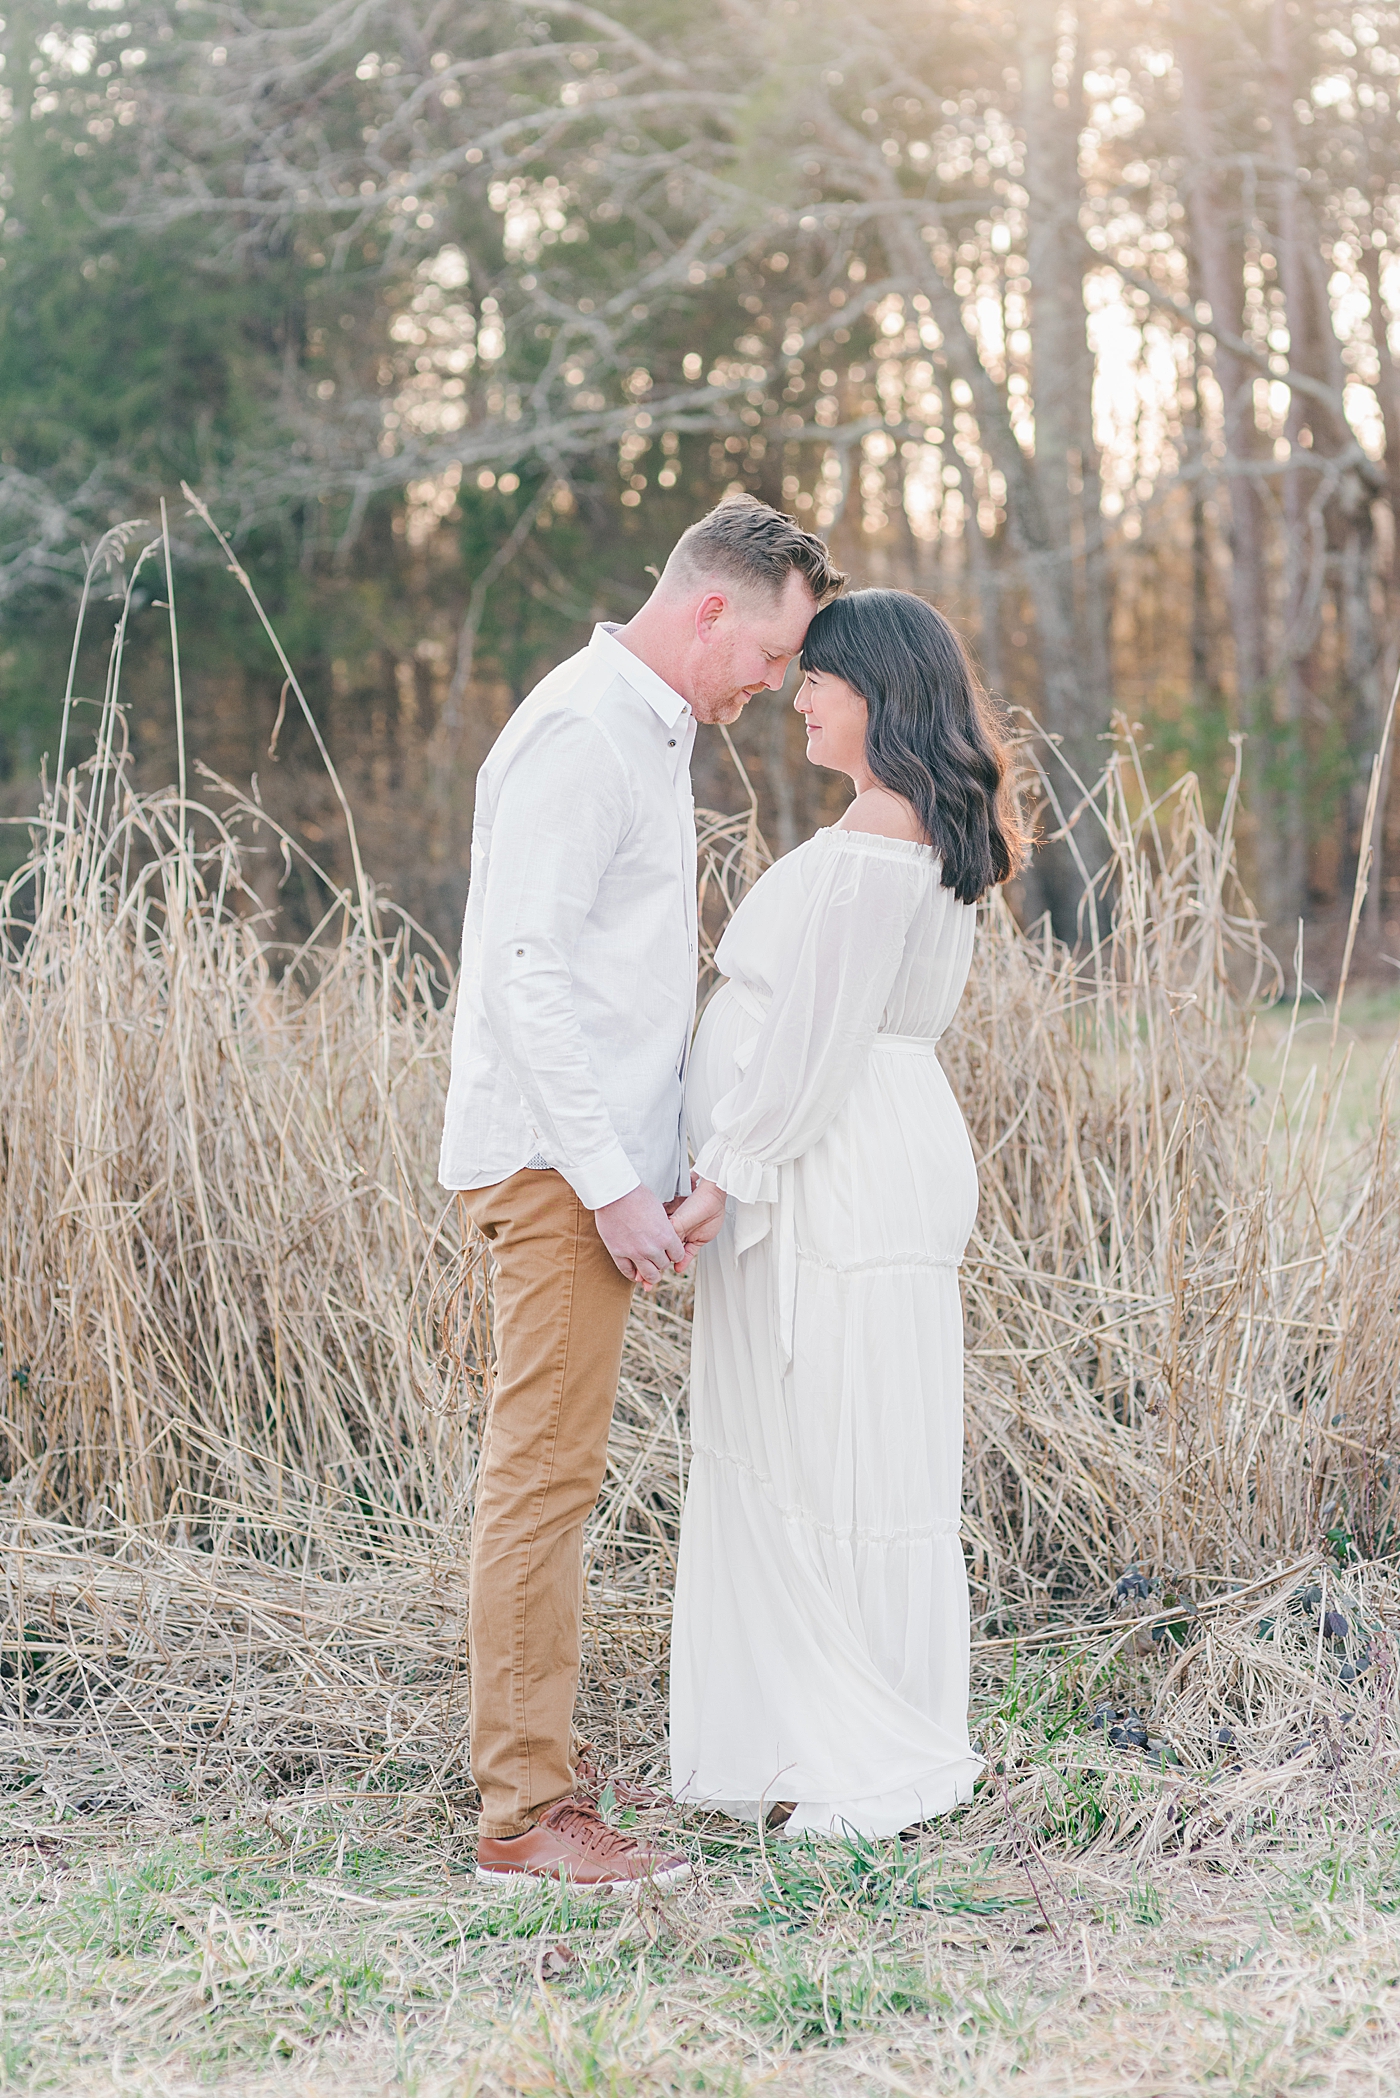 Mom and dad to be with foreheads together at fisher farm park | Photo by Anna Wisjo Photography